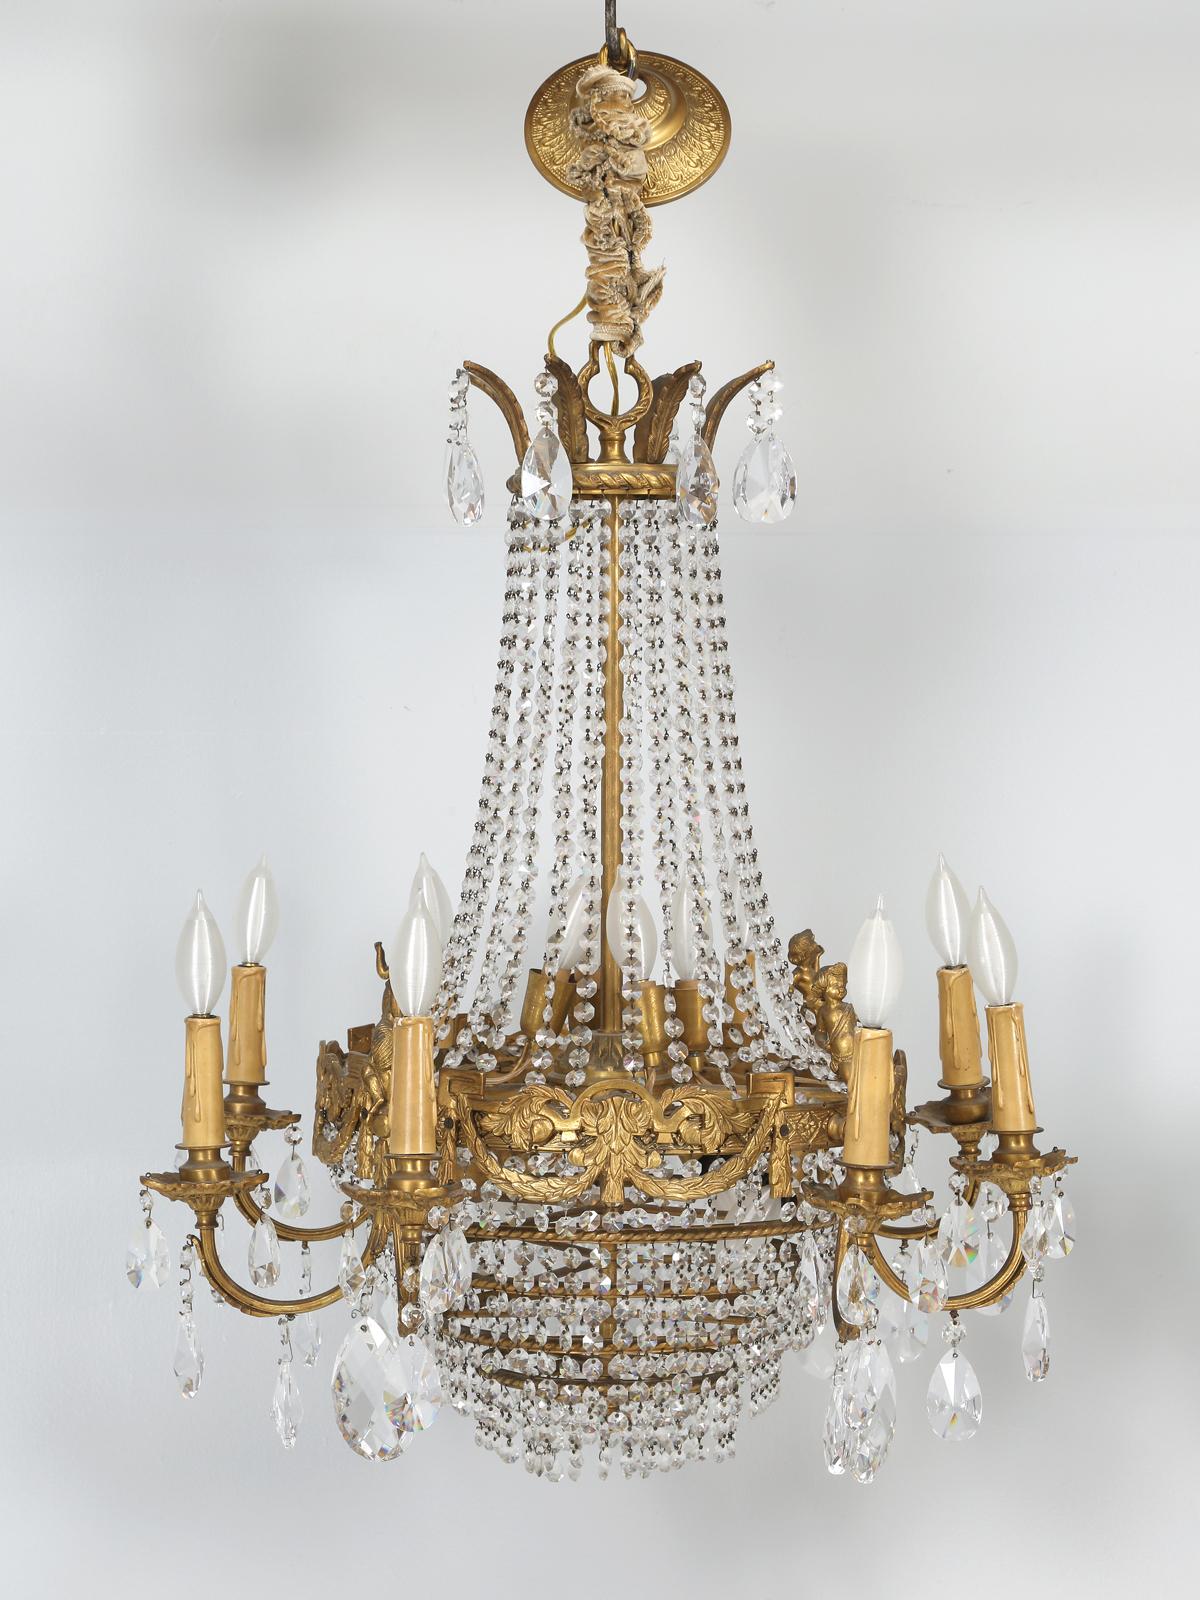 Pair, well not exactly, but I believe the proper term is near pair of old French crystal chandeliers, that although made by the same company, they are about a 95% match. Unless you look very carefully, one would never suspect there was any